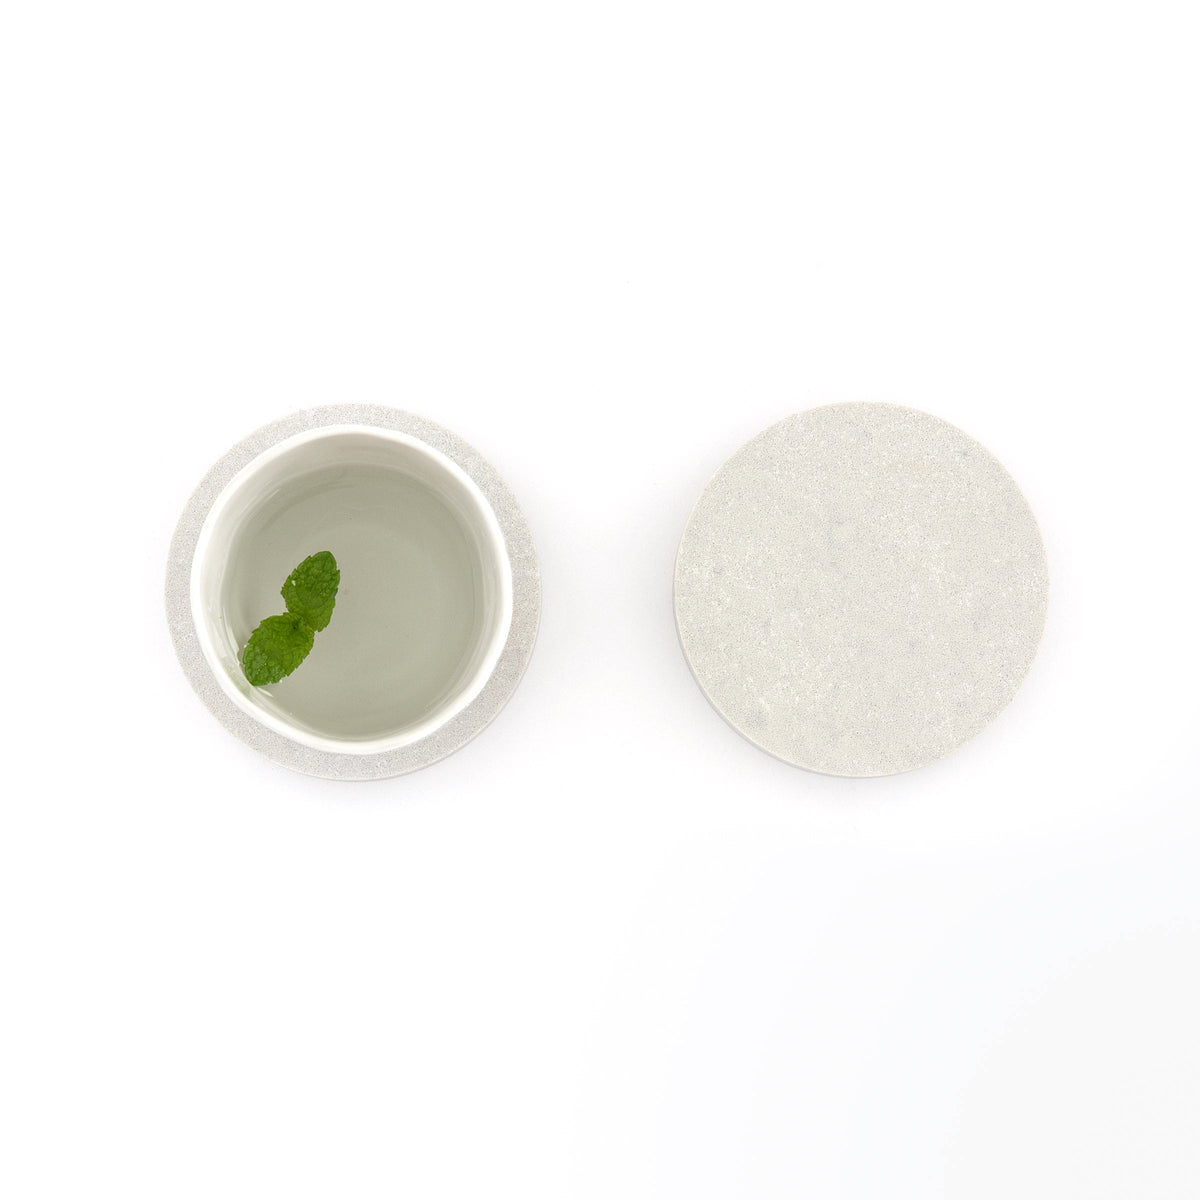 Round quartz coasters in Caesarstone Airy Concrete™ created by Aureliia Collection. Similar to a marble, the Round Quartz Coasters shown with glass of water, featuring mint leaf. An excellent home decor gift for someone who has it all.